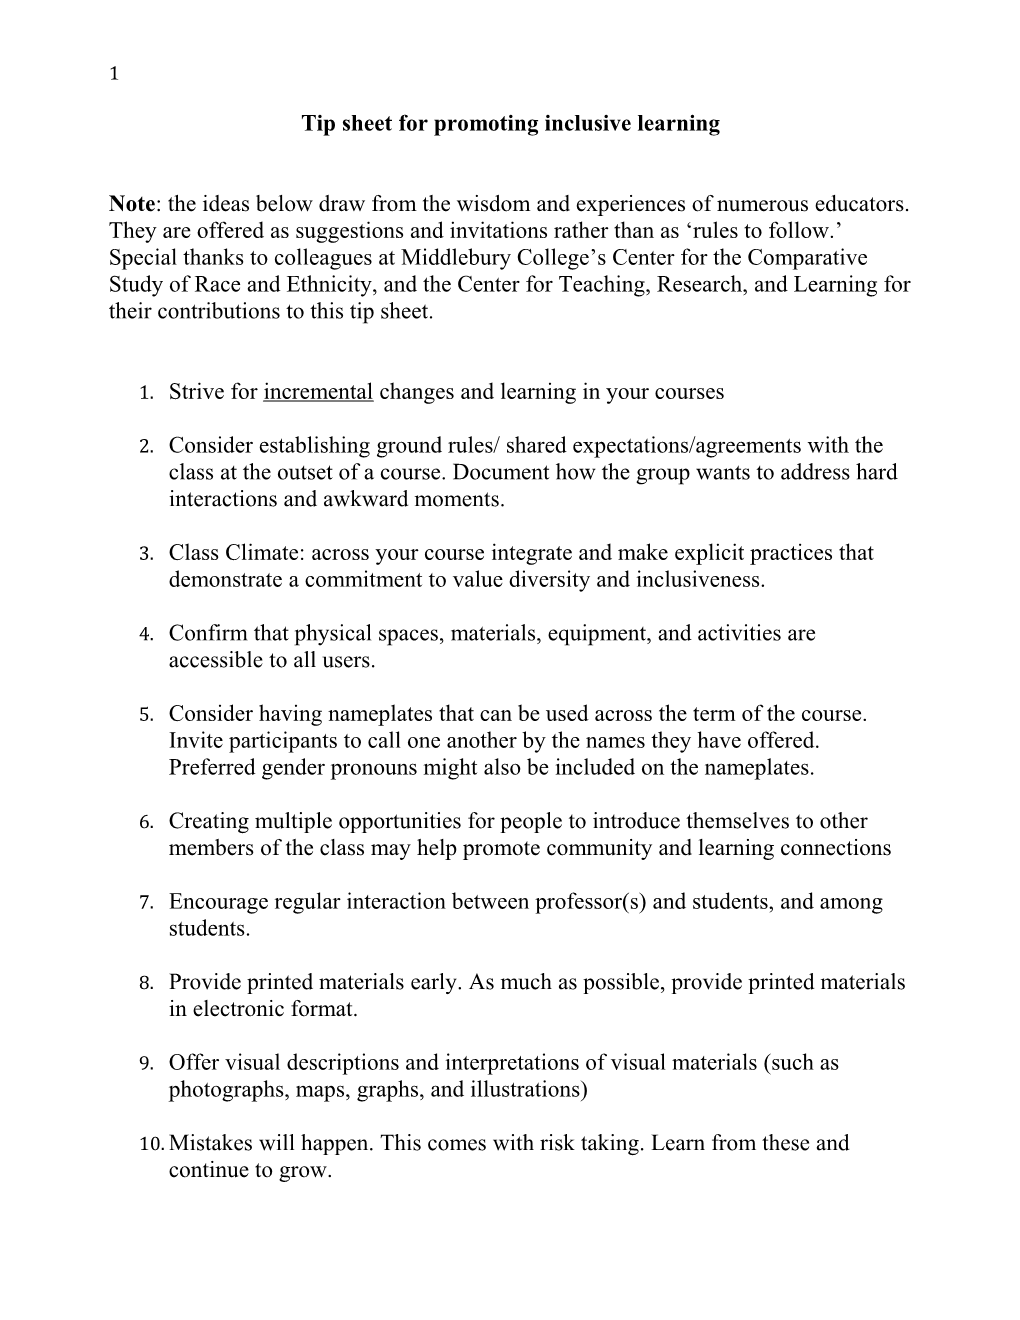 Tip Sheet for Promoting Inclusive Learning